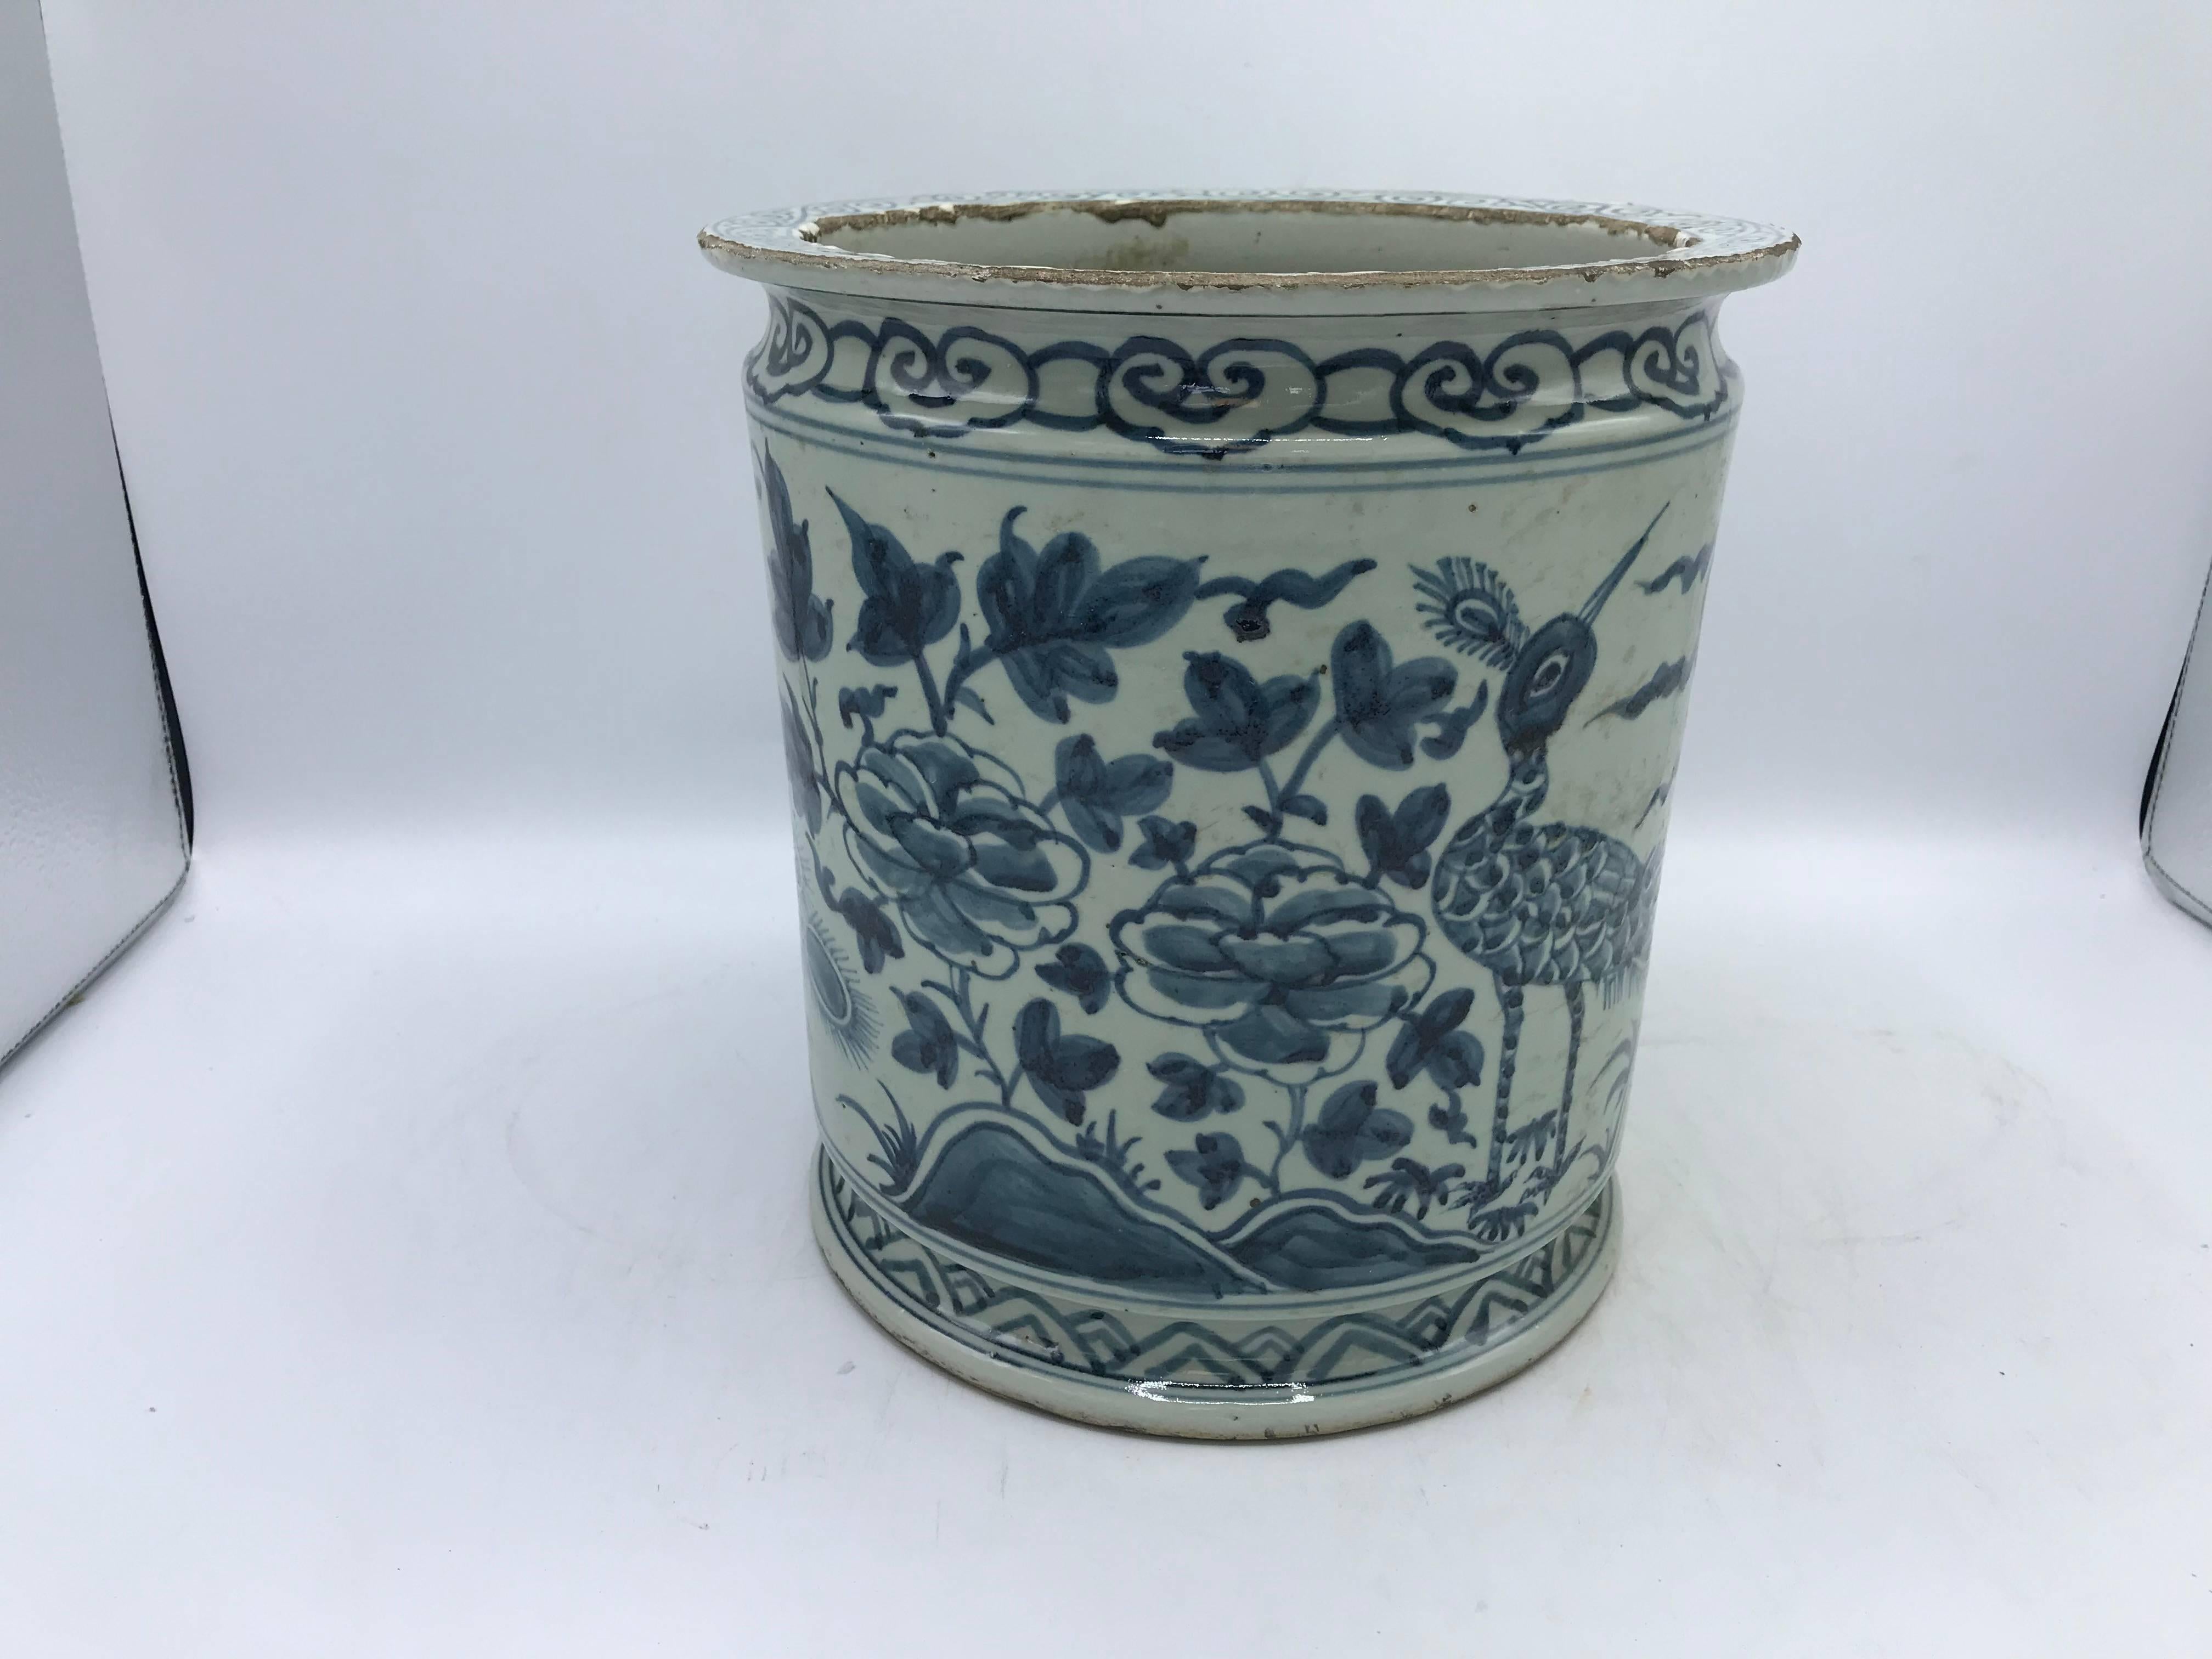 Listed is a gorgeous, 19th century blue and white cachepot planter. The piece has a stunning peacock and floral motif all-over. Heavy. Can hold water for its intended use.